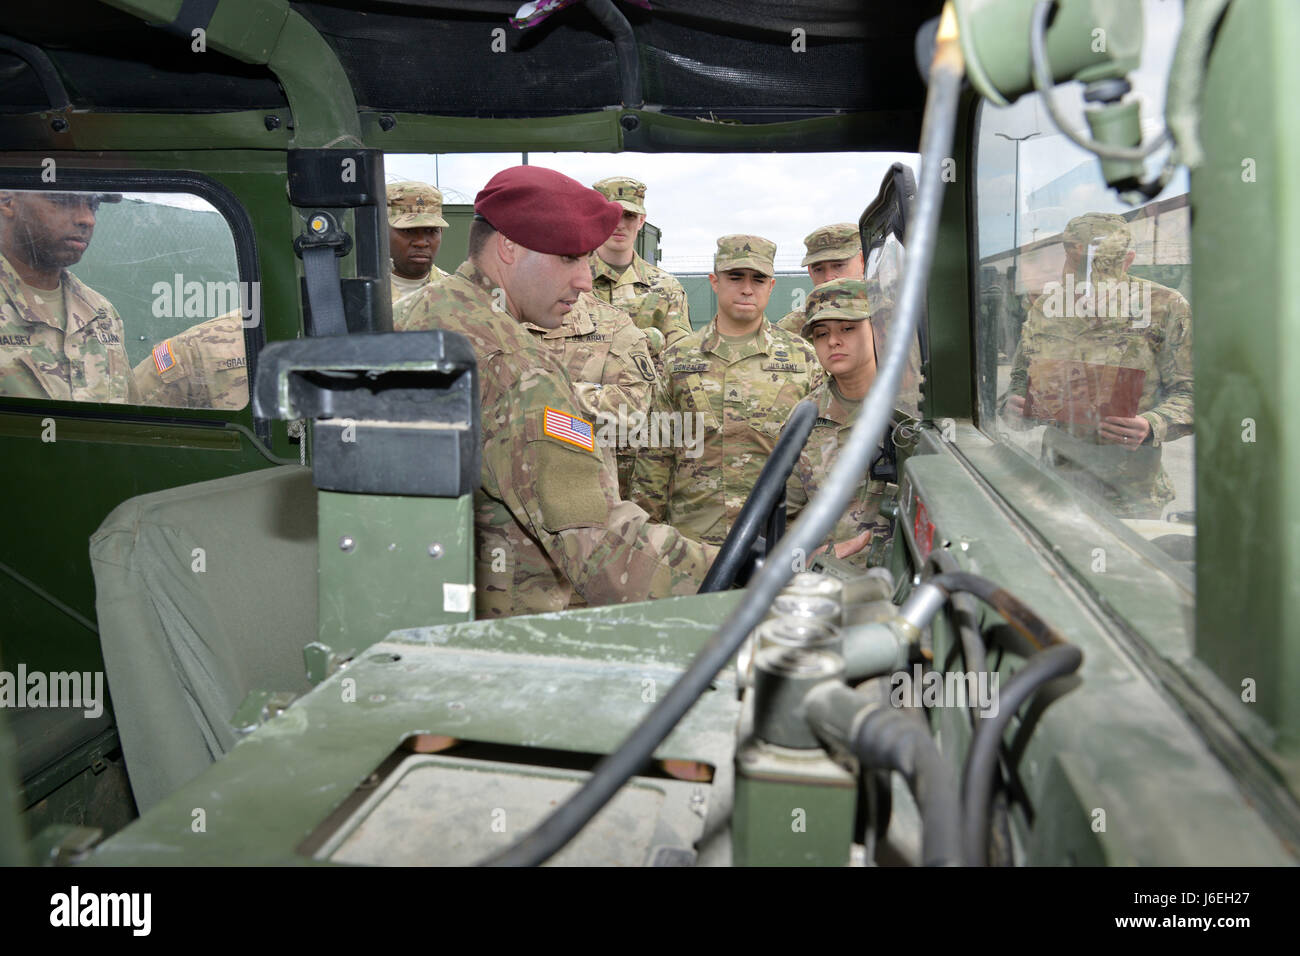 U.S. Army Paratroopers assigned to the 173rd Airborne Brigade Support Battalion, 173rd Airborne Brigade, are tested on their procedures conducting Preventive Maintenance Checks and Service of military vehicles during the Junior Leader Challenge at Caserma Del Din, Vicenza, Italy May 10, 2017.  The 173rd Airborne Brigade is the U.S. Army Contingency Response Force in Europe, capable of projecting ready forces anywhere in the U.S. European, Africa or Central Commands areas of responsibility within 18 hours.   (U.S. Army photo by Visual Information Specialist Antonio Bedin/released) Stock Photo